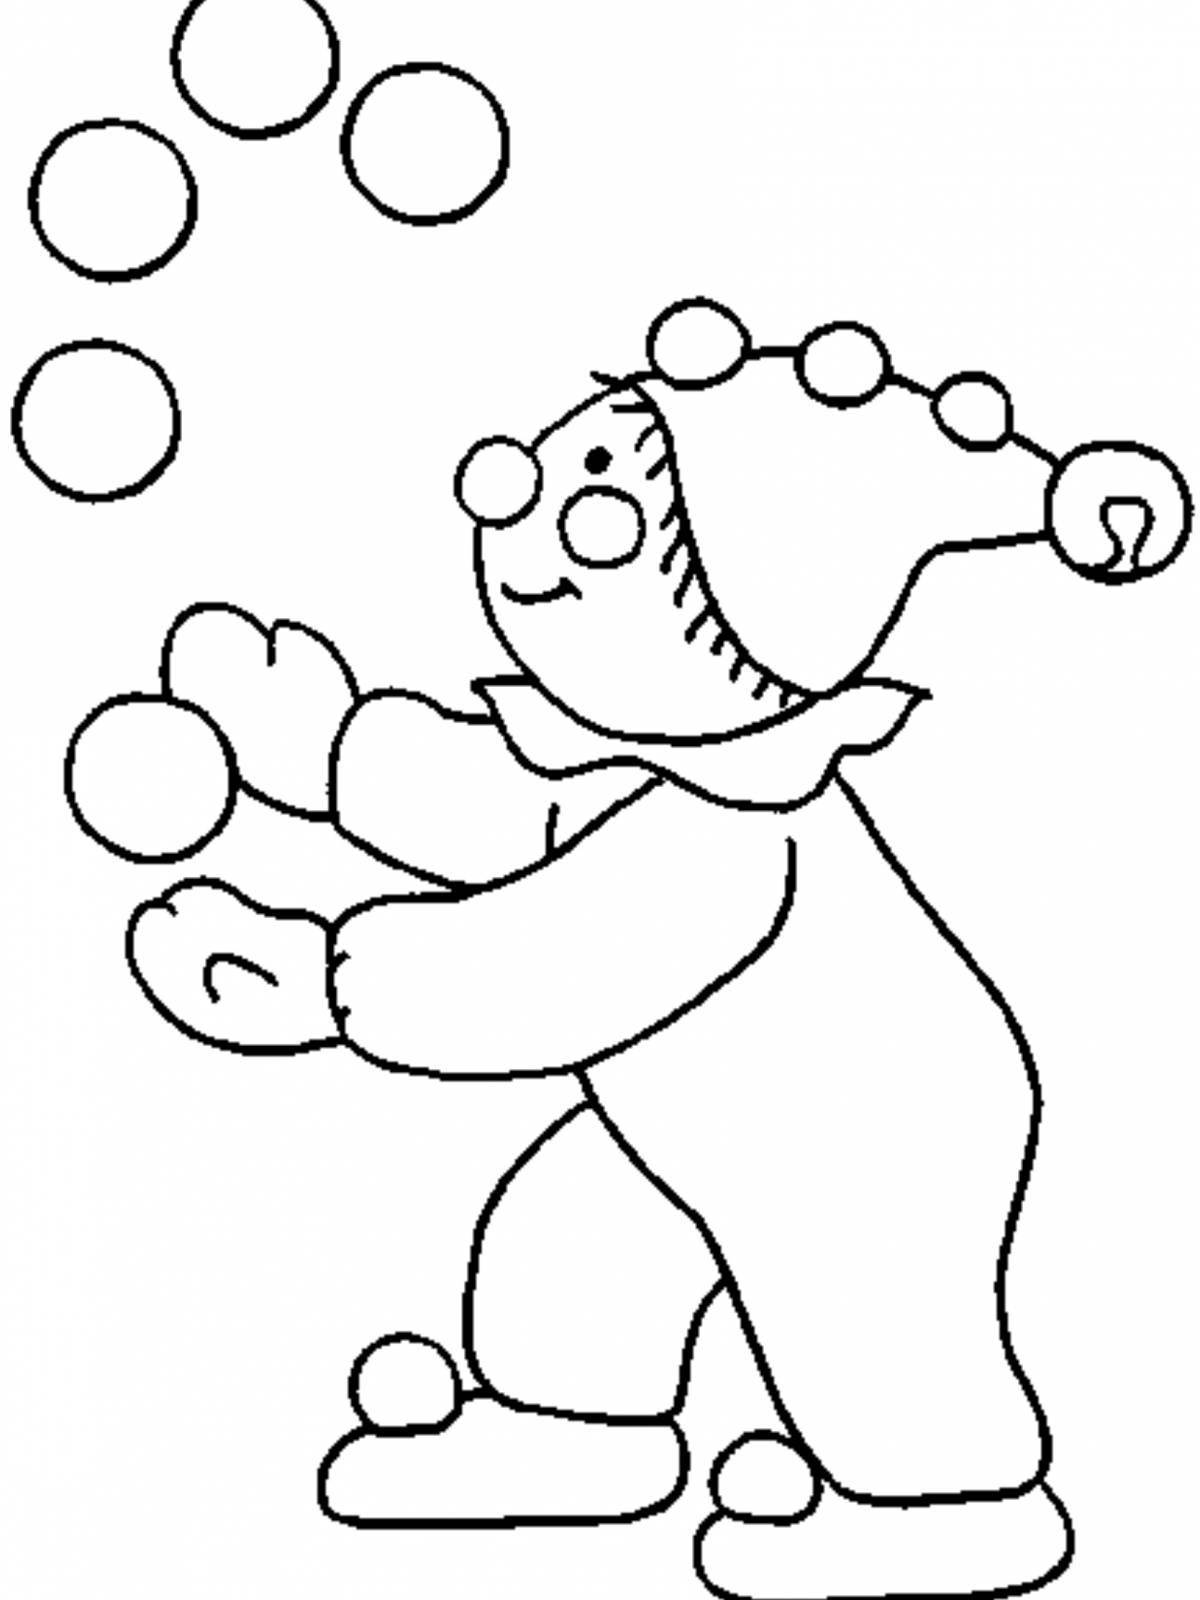 Enthusiastic parsley coloring page